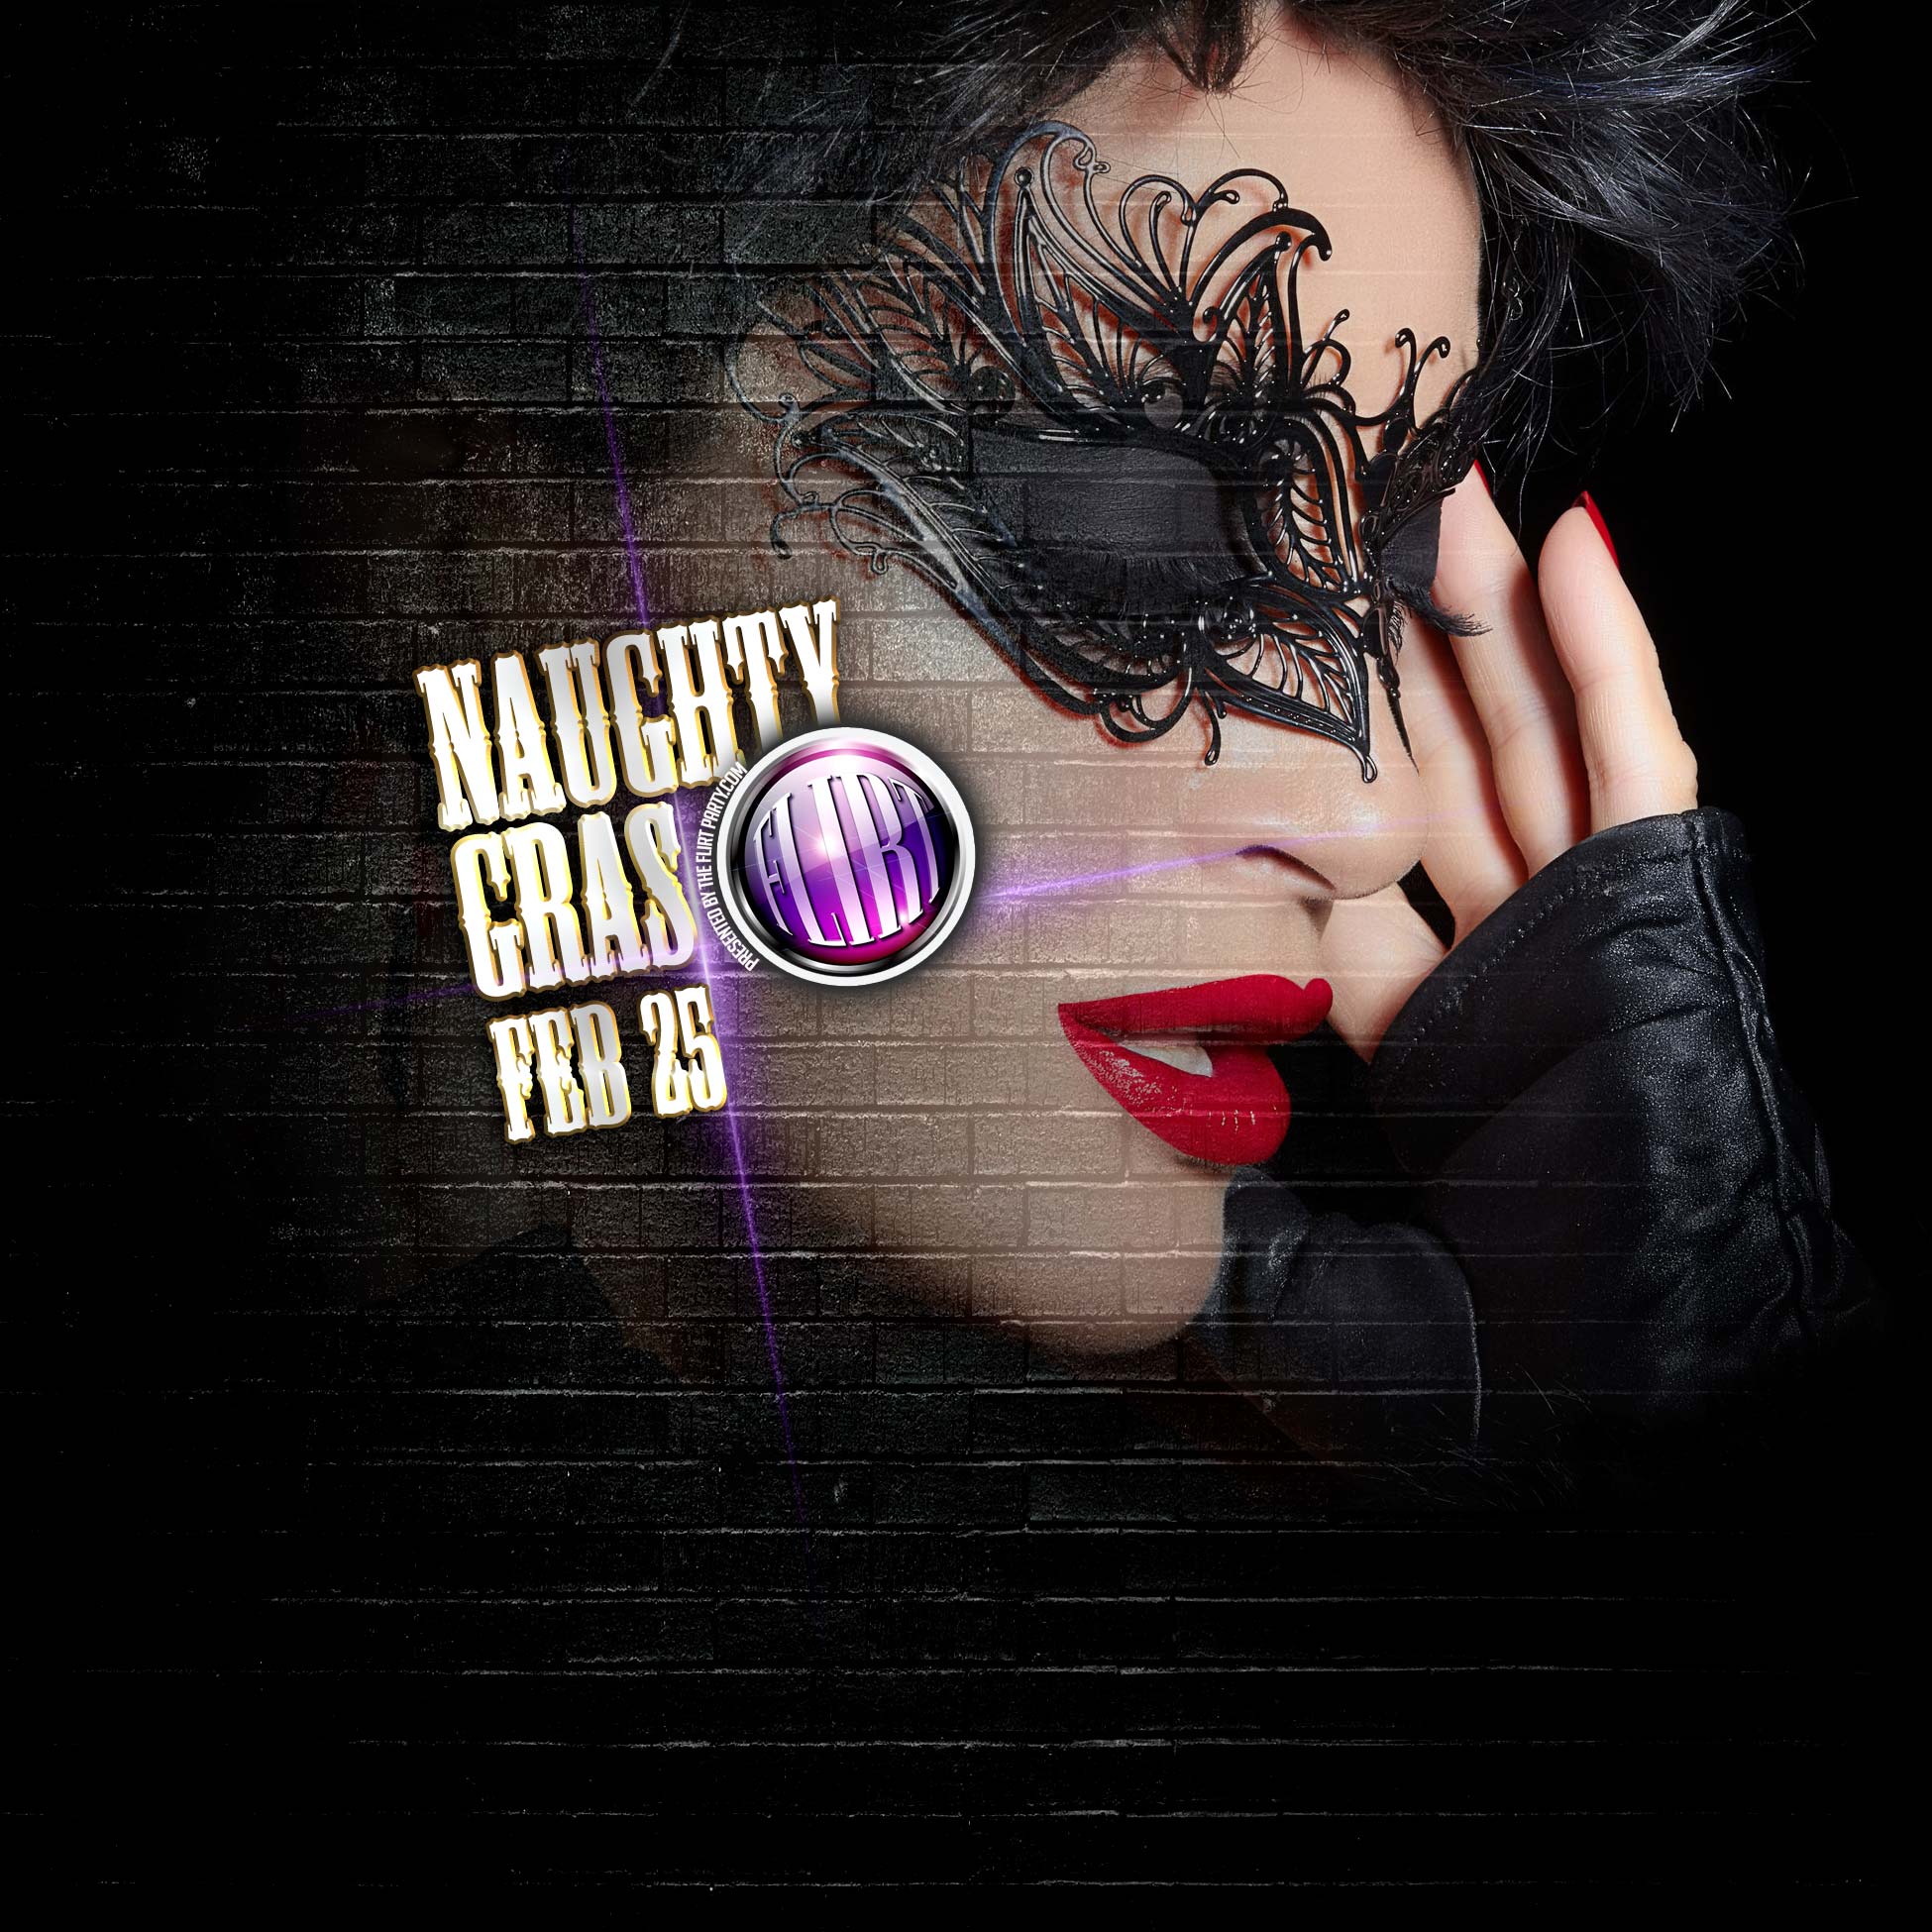 feb-25-naughty-gras-featured